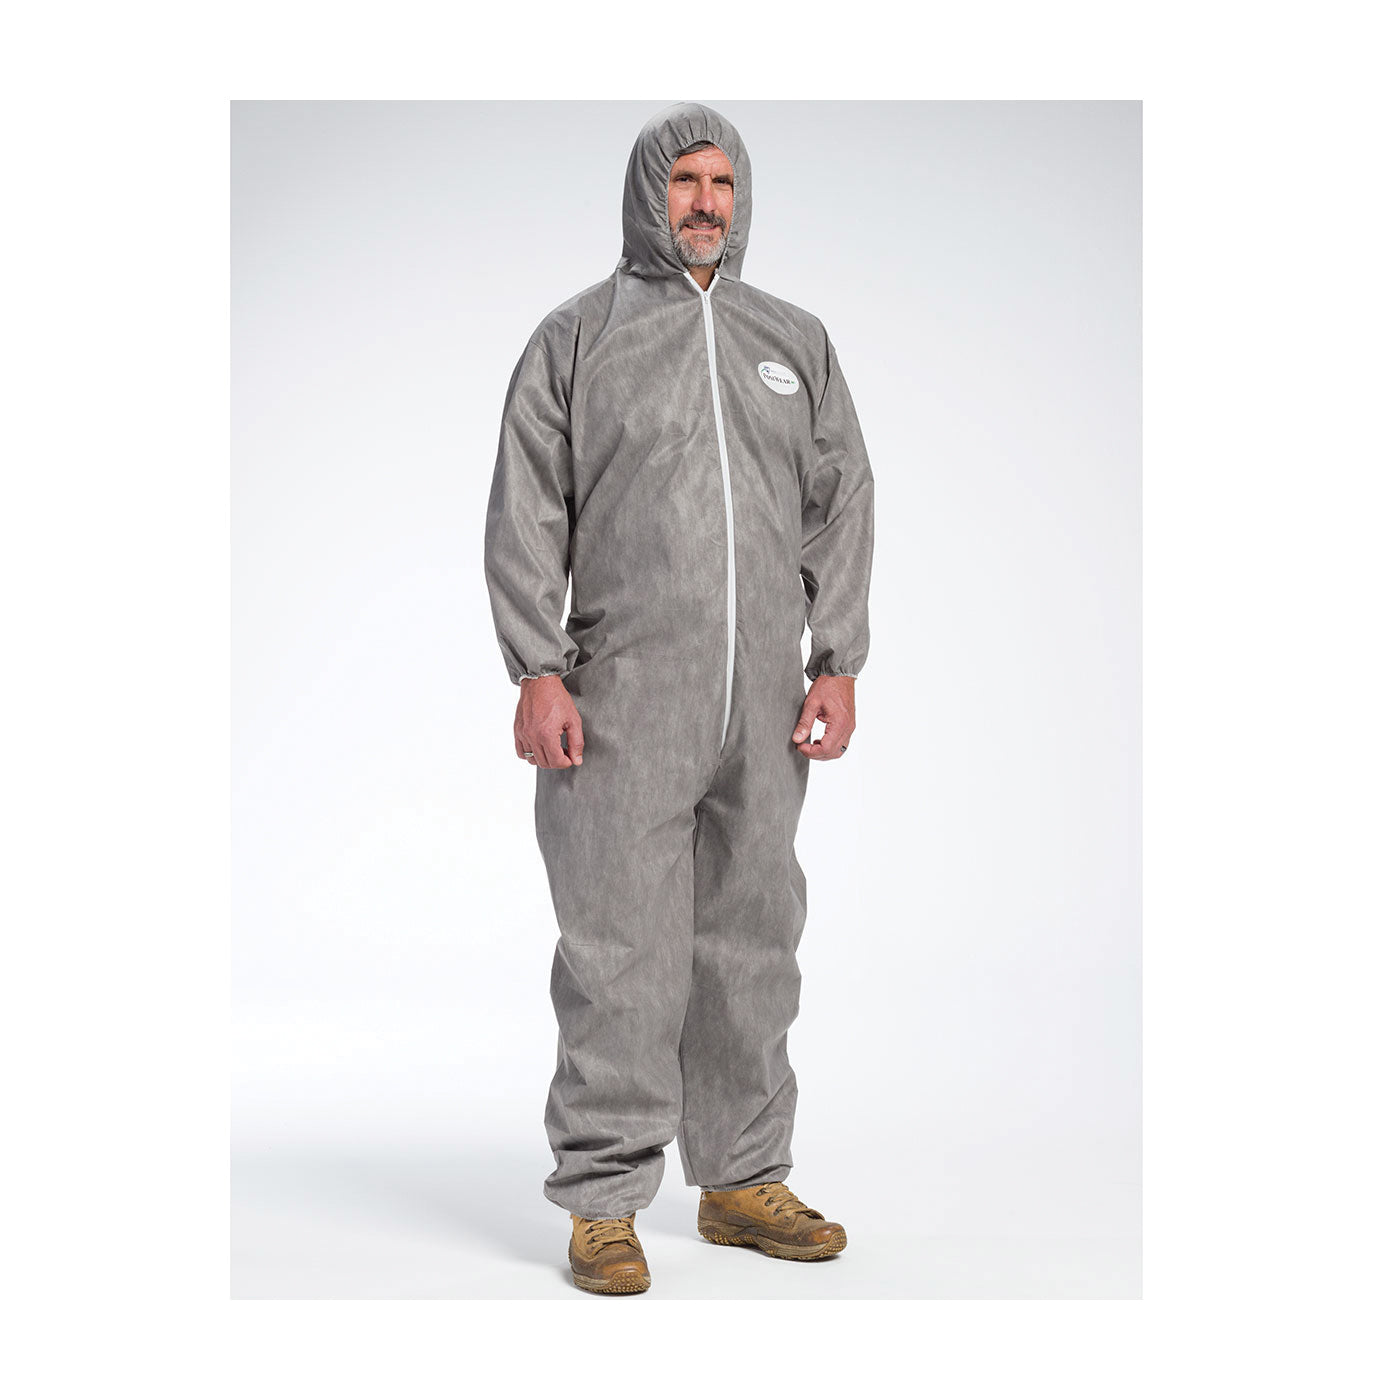 PIP® C3906/XXL C3906 M3 ANTI-STATIC DISPOSABLE COVERALL WITH HOOD, 2XL, GRAY, SMMMS FABRIC, 29.1 IN CHEST, 30.3 IN L INSEAM